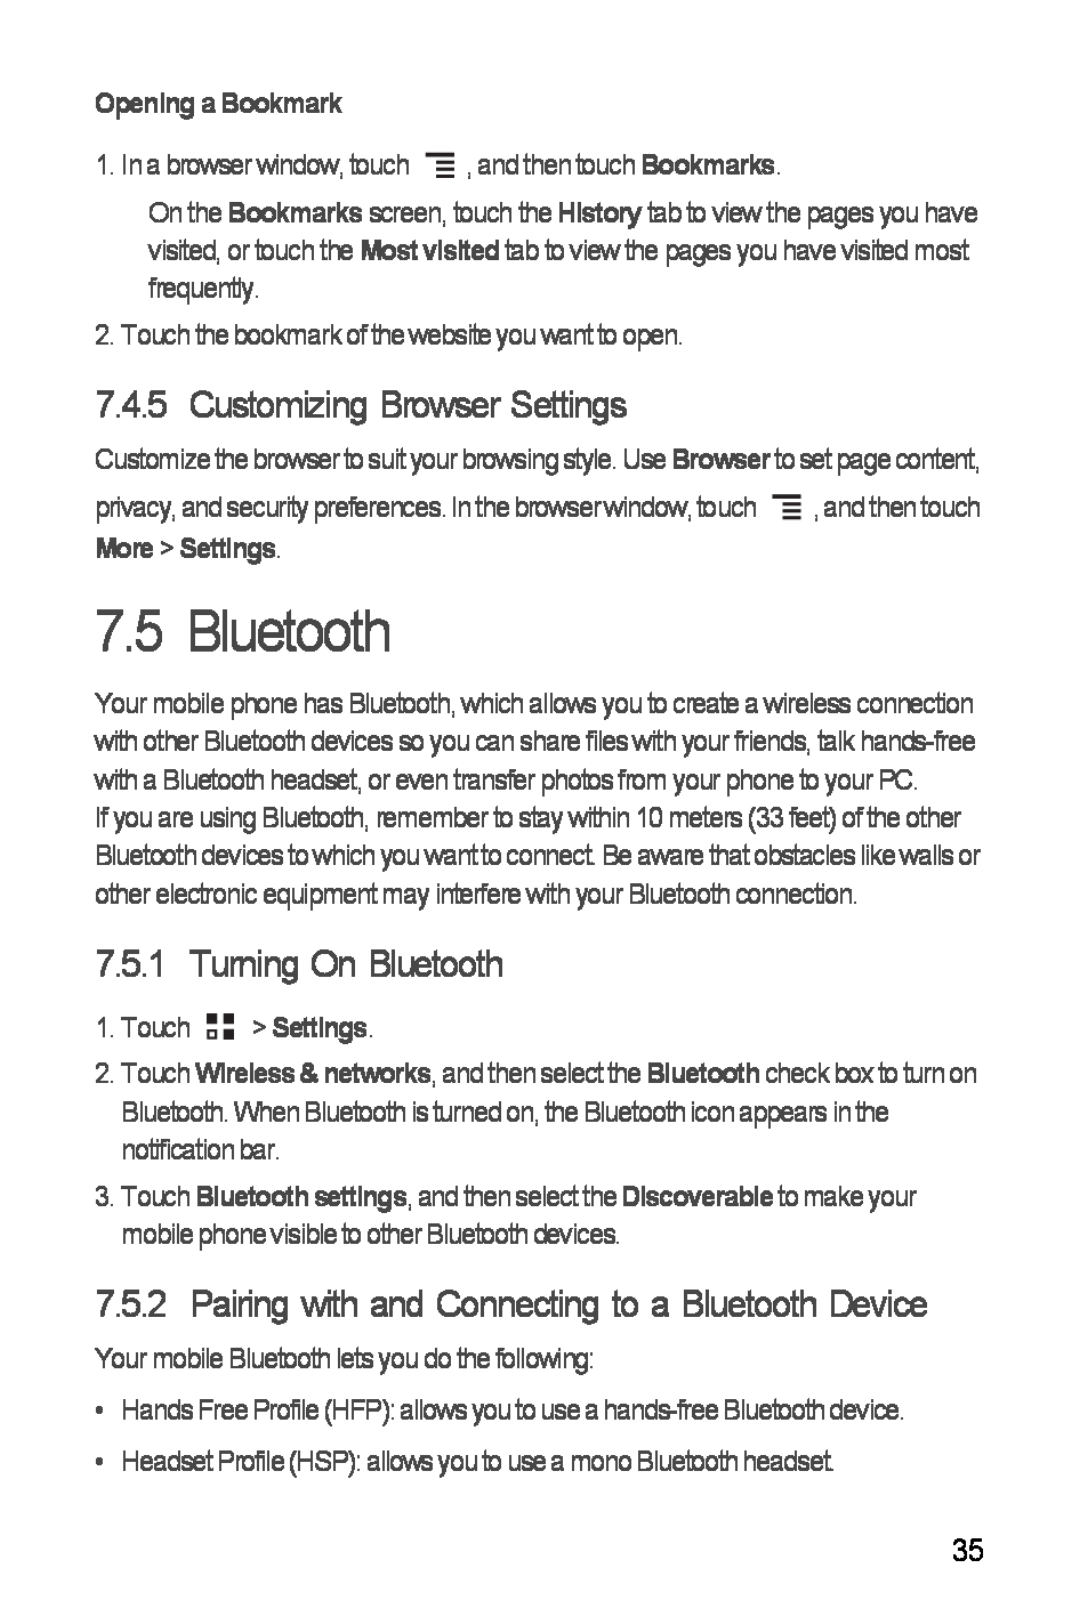 Huawei Ascend Y Customizing Browser Settings, Turning On Bluetooth, Pairing with and Connecting to a Bluetooth Device 